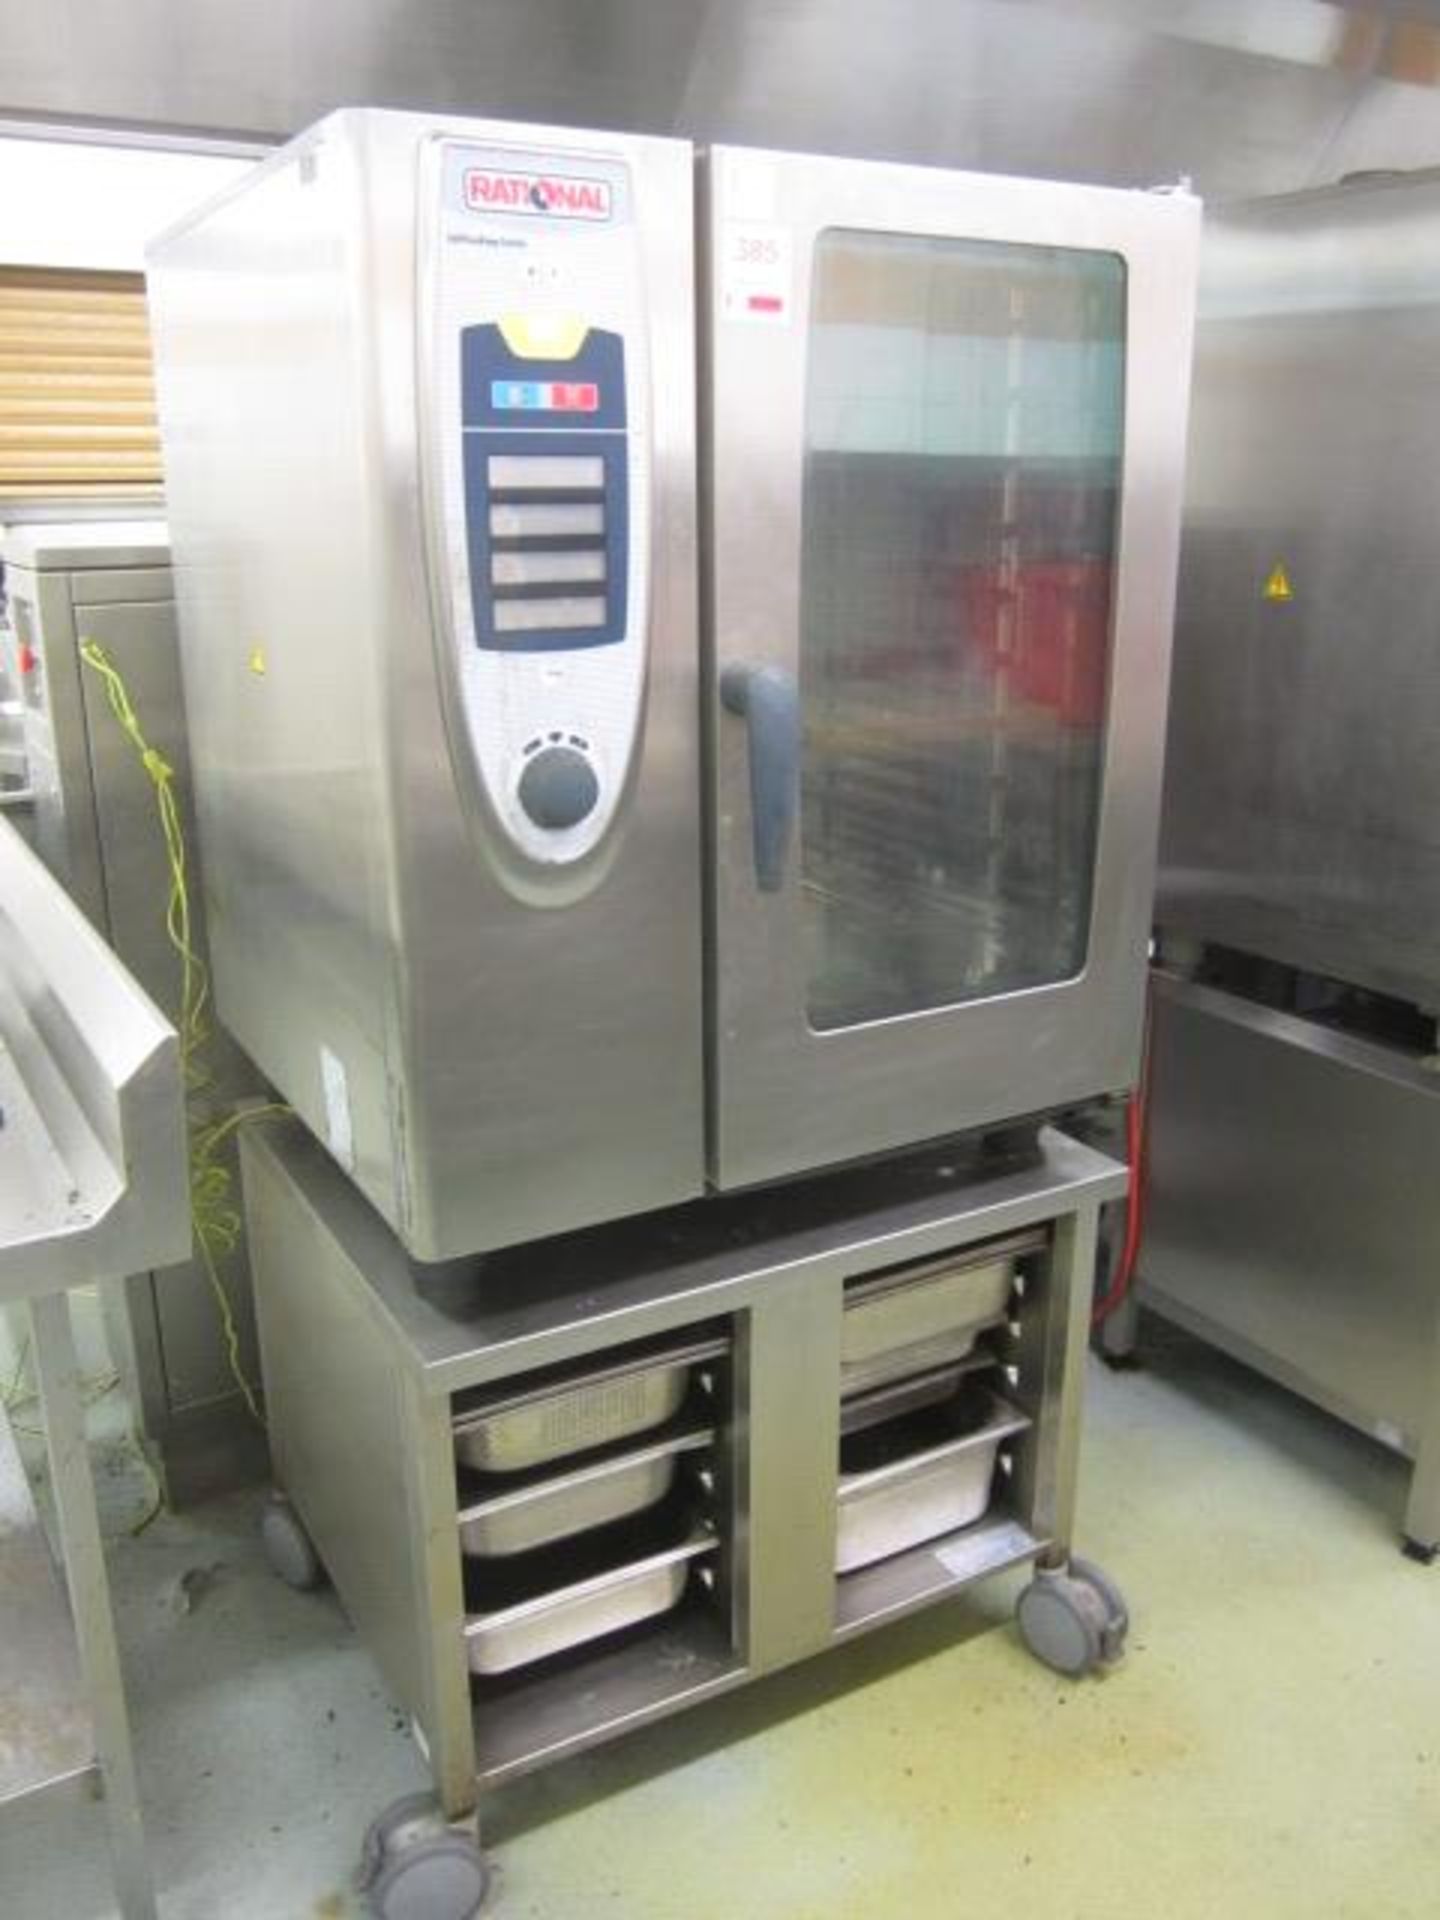 Rational stainless steel shelf cooker centre, model SC101, serial no. AC400/50-60, mounted on